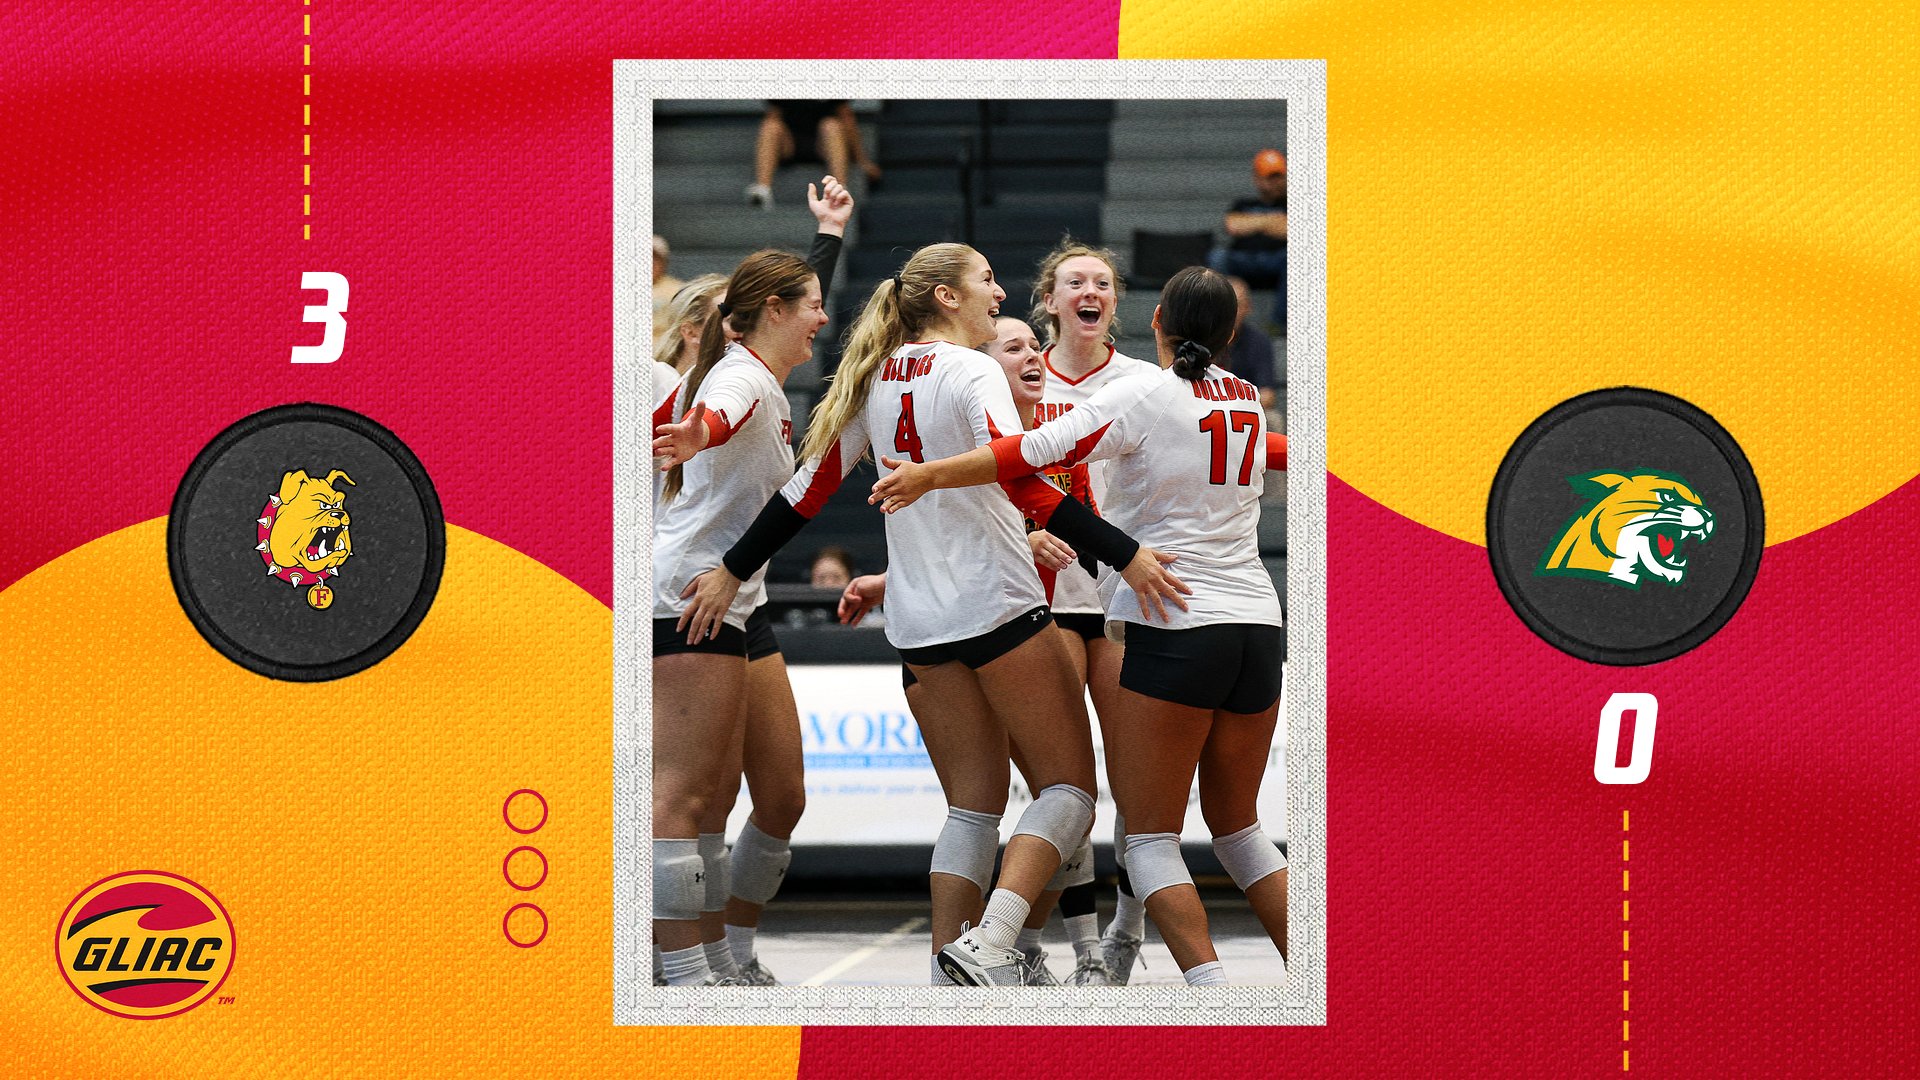 Ferris State Volleyball Closes Regular-Season With Home Sweep Over NMU